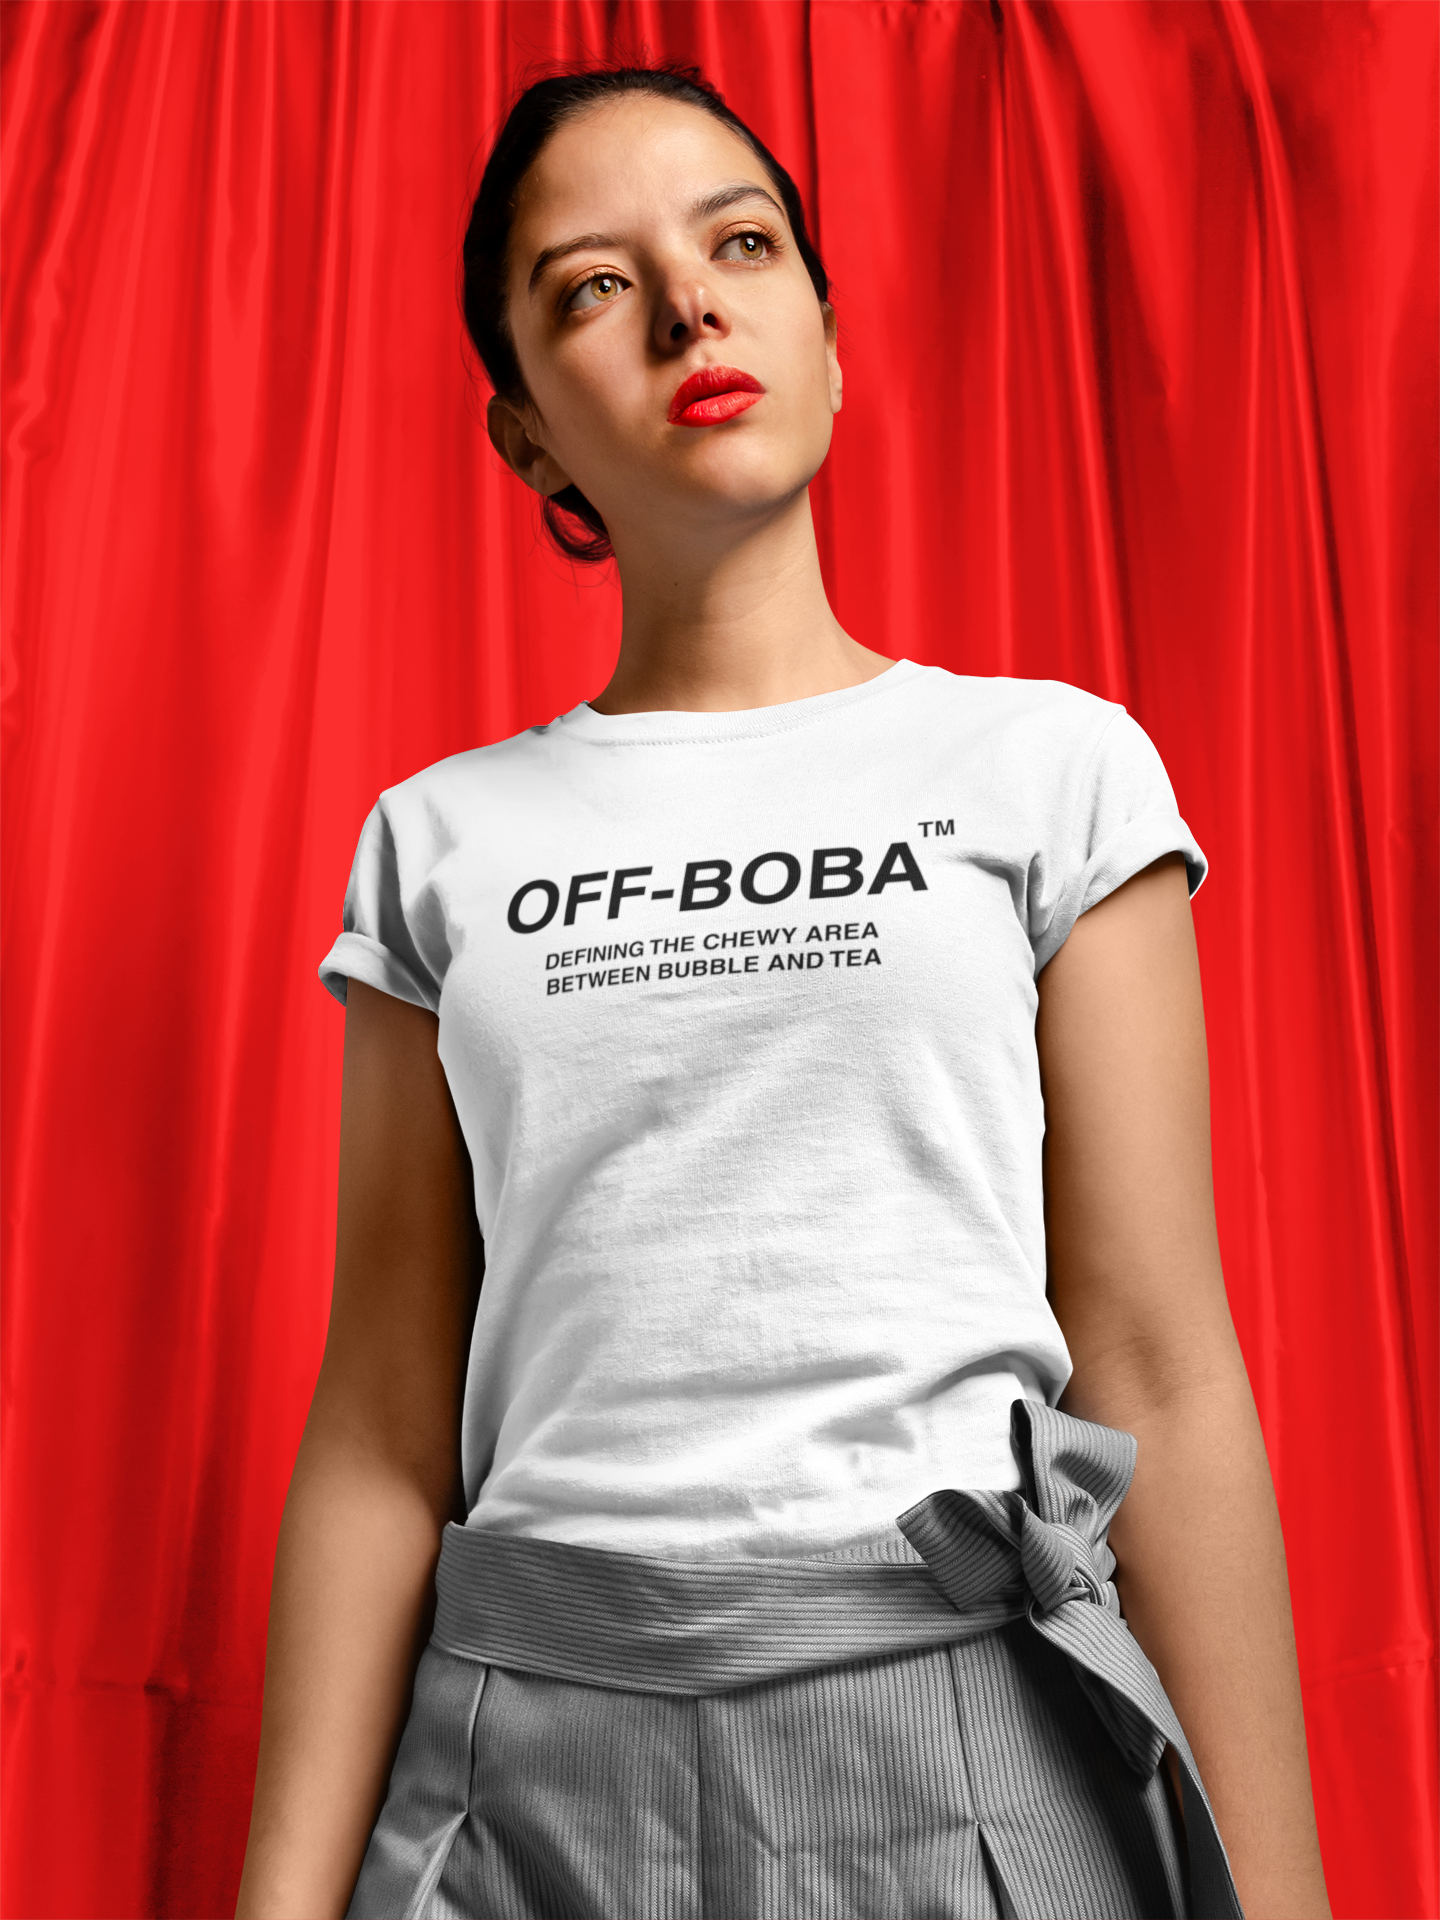 Woman in red lipstick wearing an Off Boba Shirt - Off White Parody